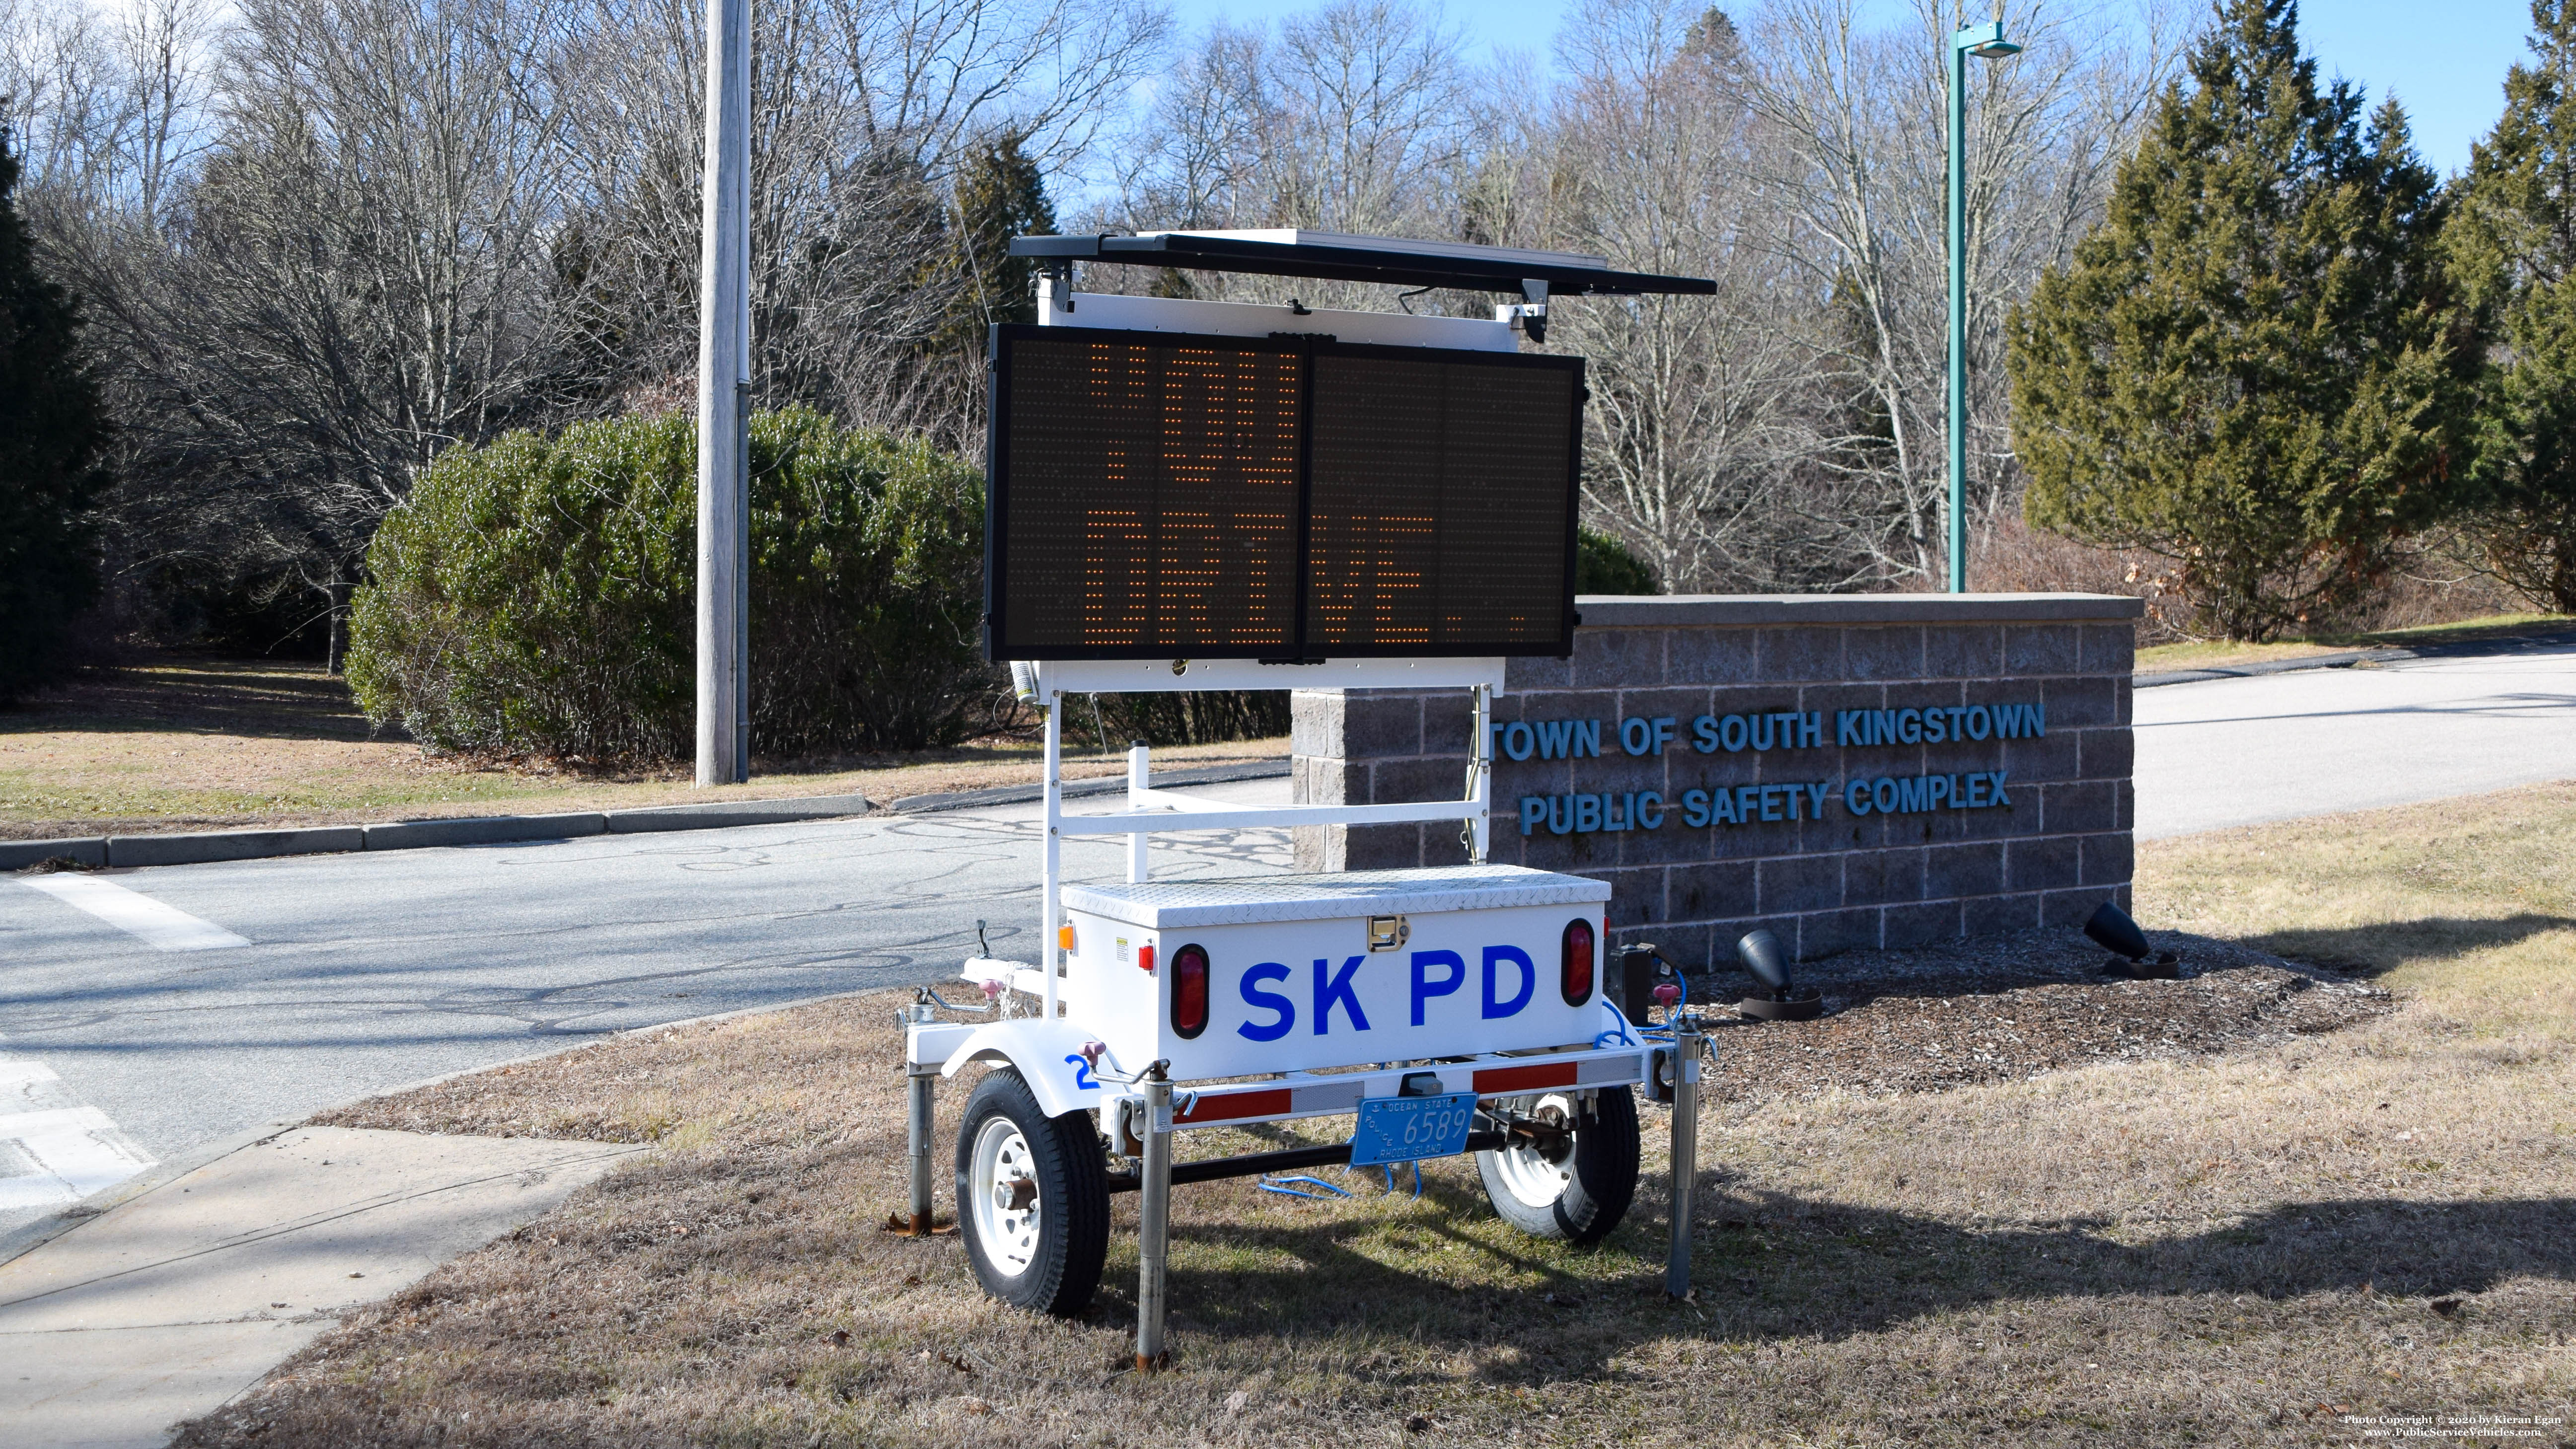 A photo  of South Kingstown Police
            Message Trailer 2, a 2006-2010 All Traffic Solutions Speed Trailer             taken by Kieran Egan